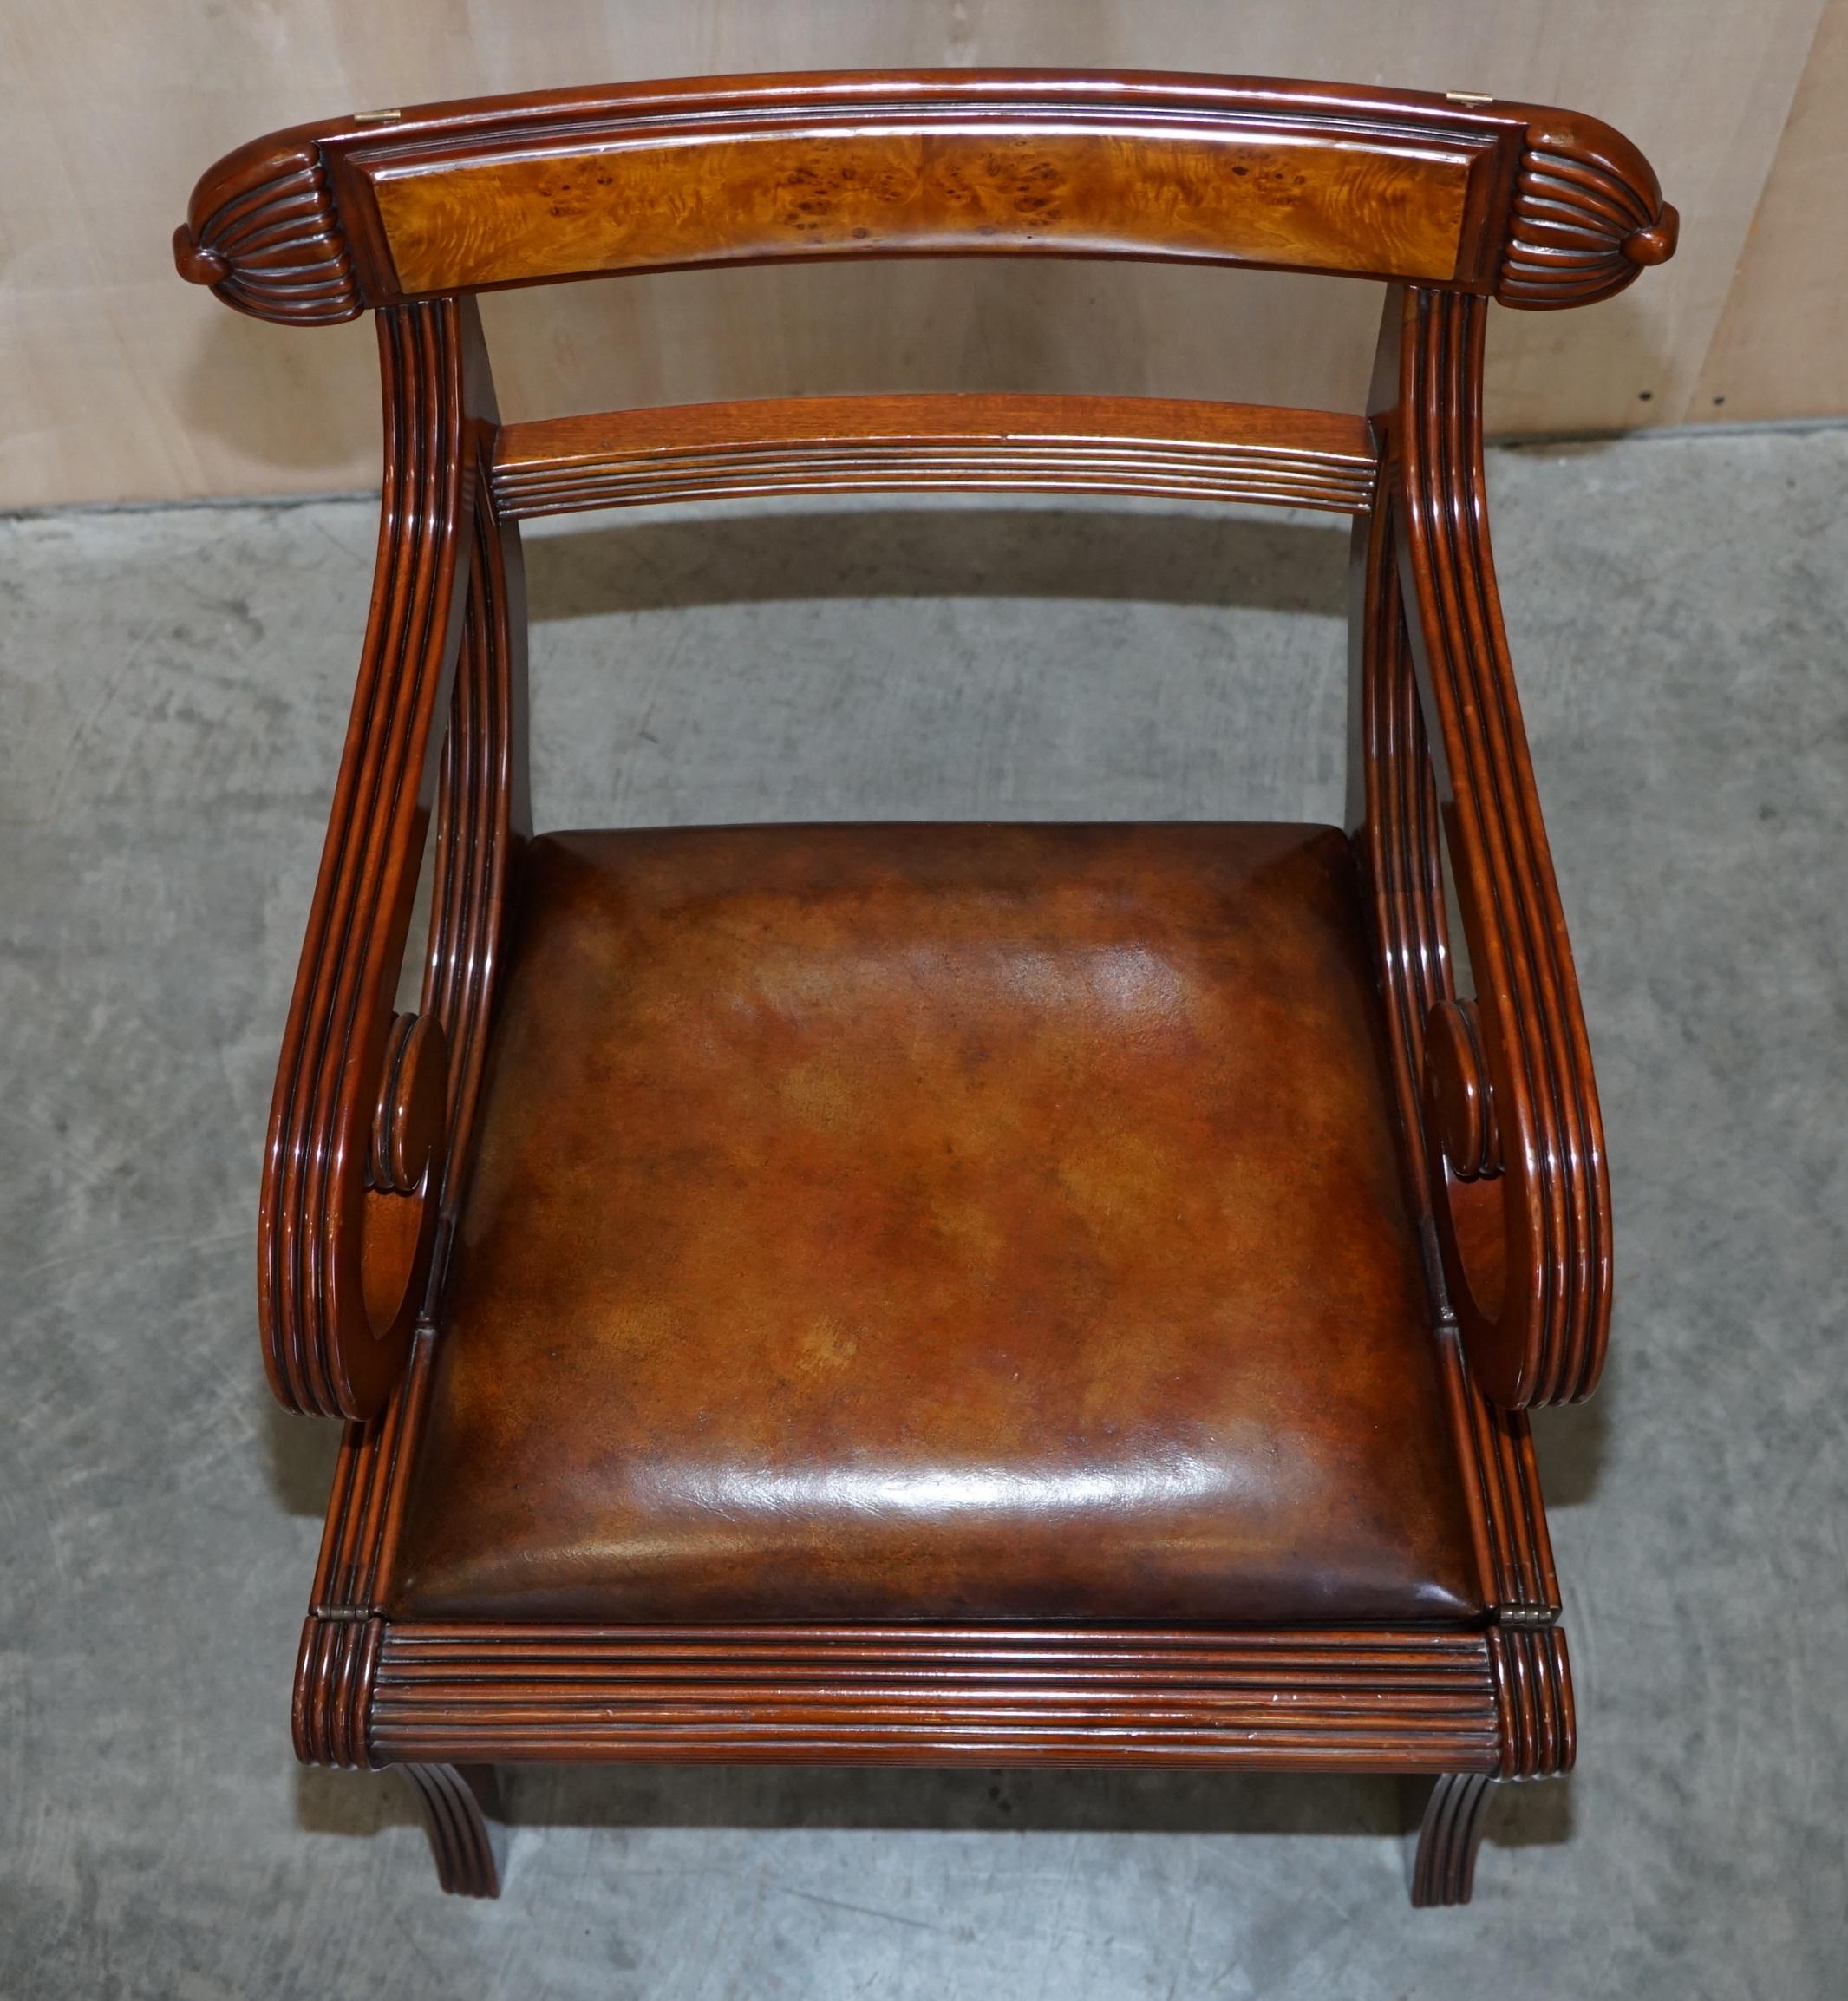 Hand-Crafted Burr Walnut Brown Leather Regency Metamorphic Reading Armchair to Library Steps For Sale